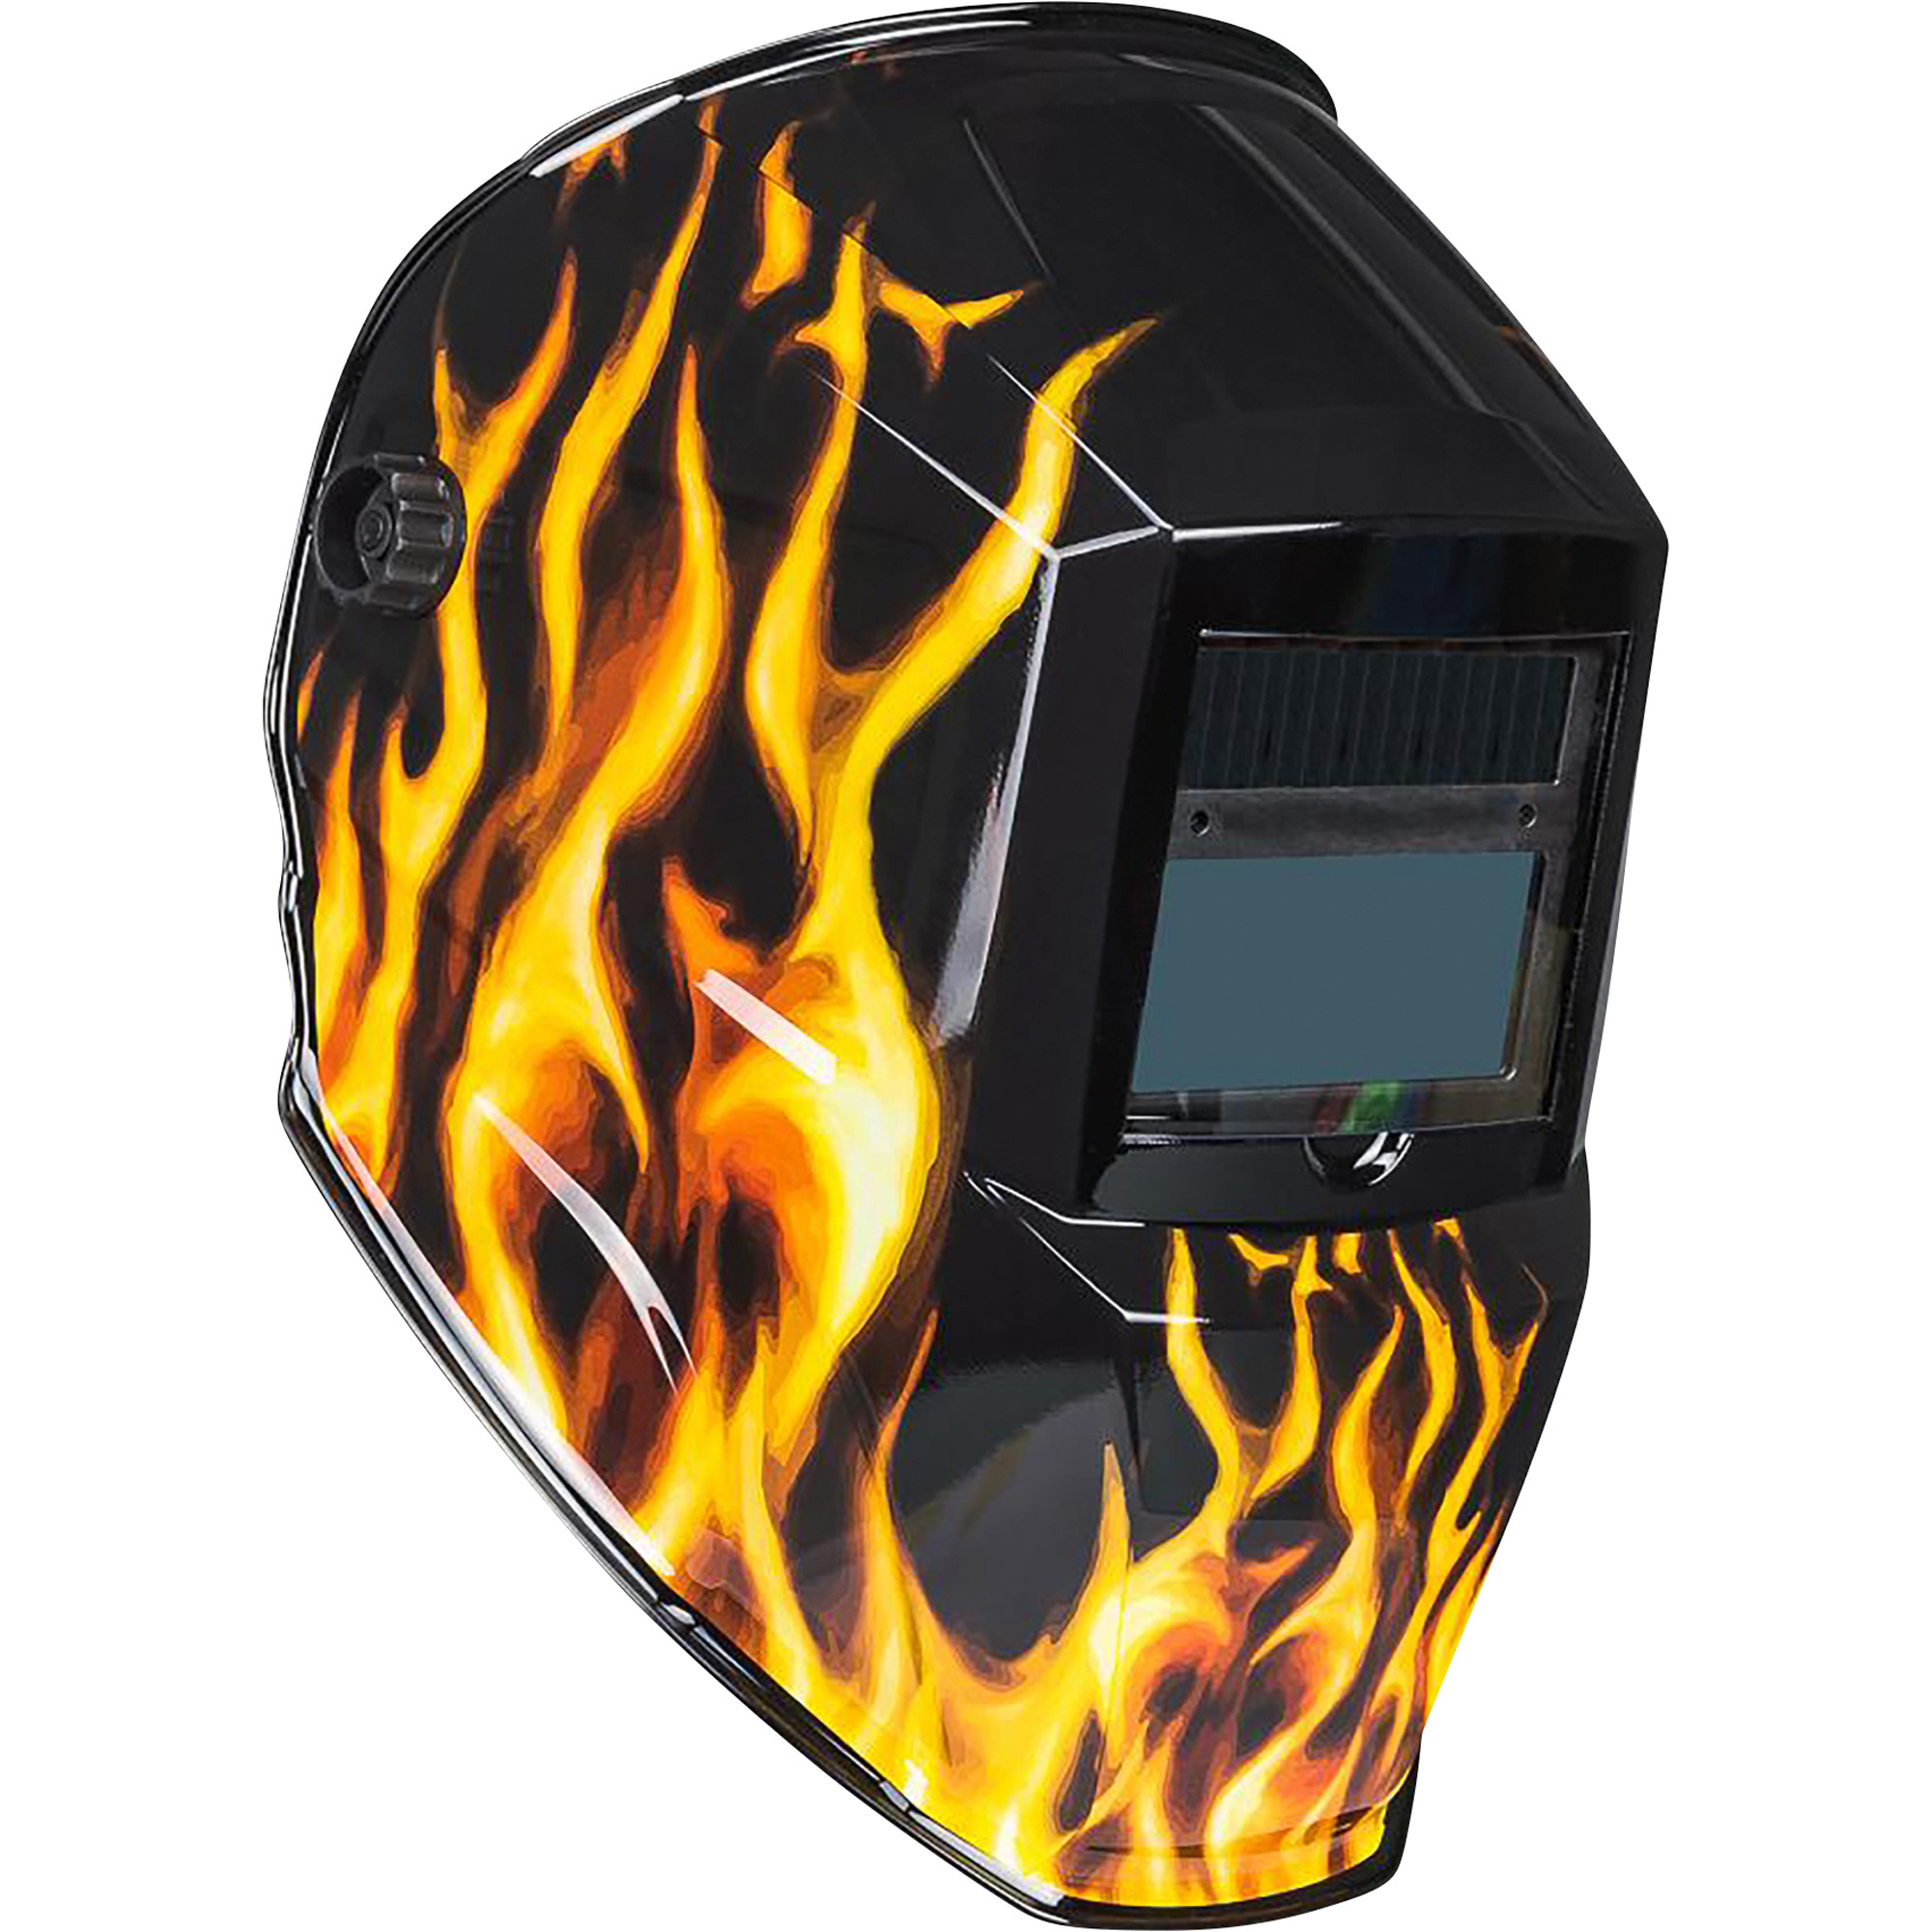 Forney Auto-Darkening Variable-Shade Welding Helmet with Grind Mode and HD Optical Clarity â DIN 9â13, Scorch Flame Graphic, Model 55859